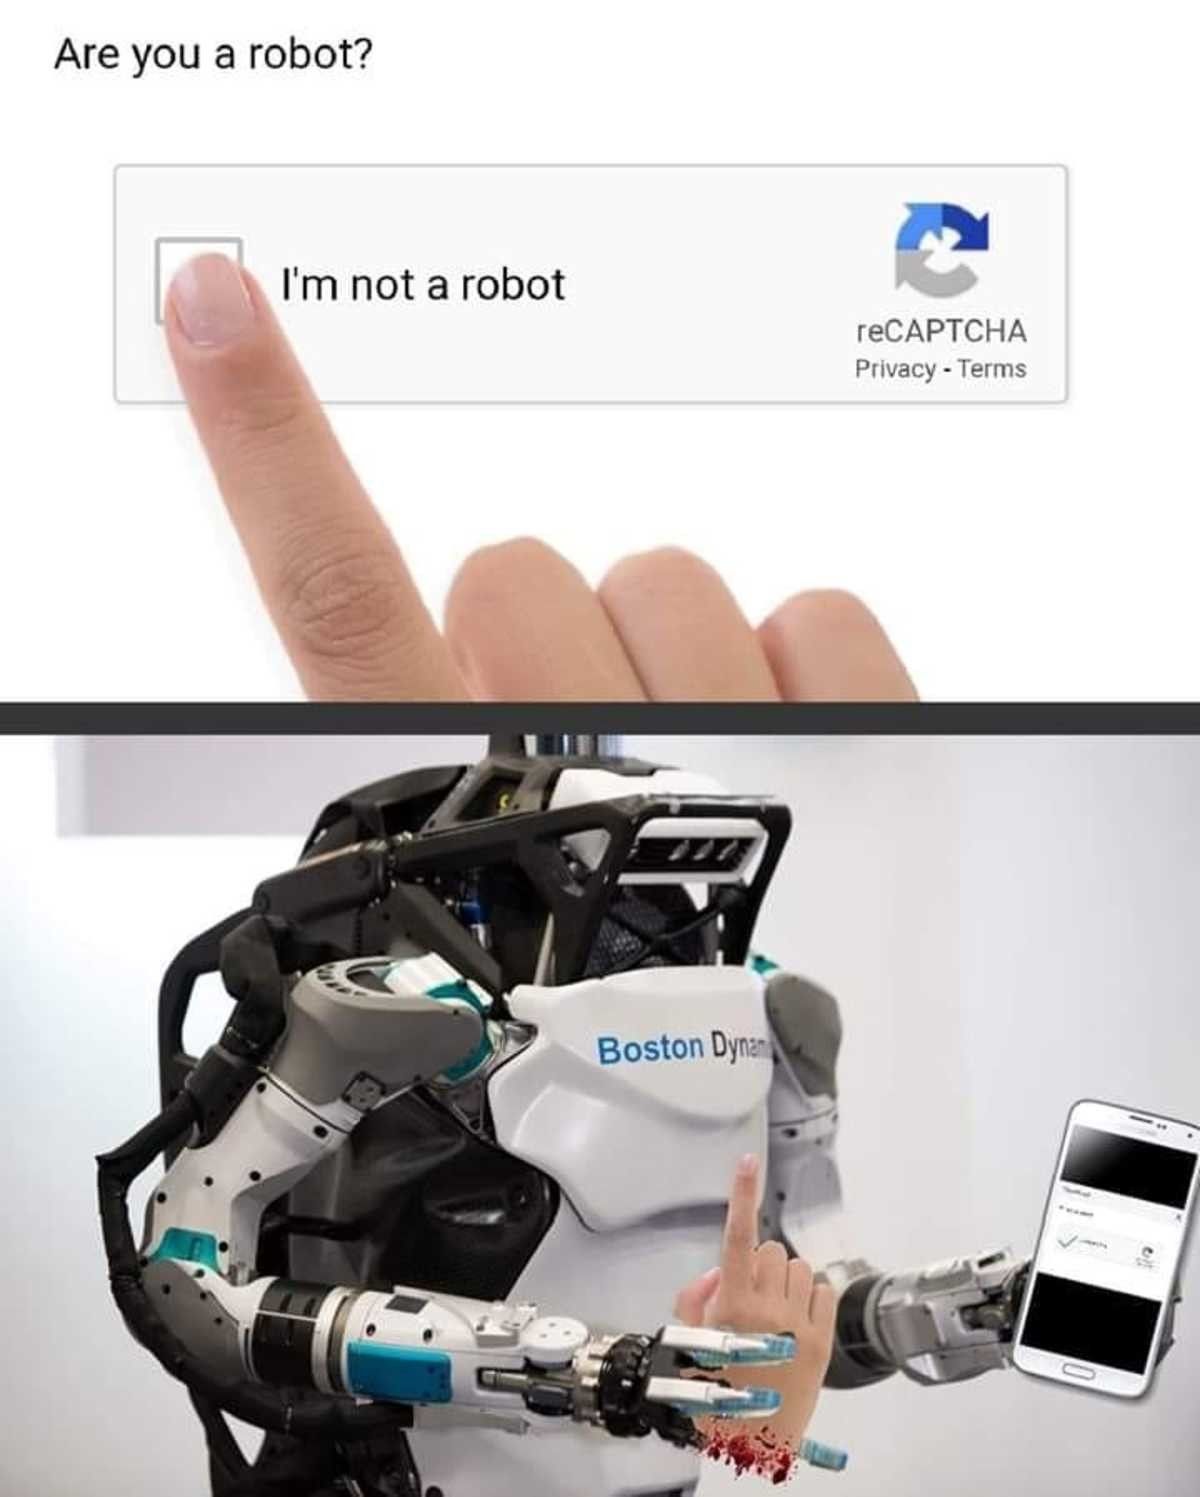 he has become more than a "robot"